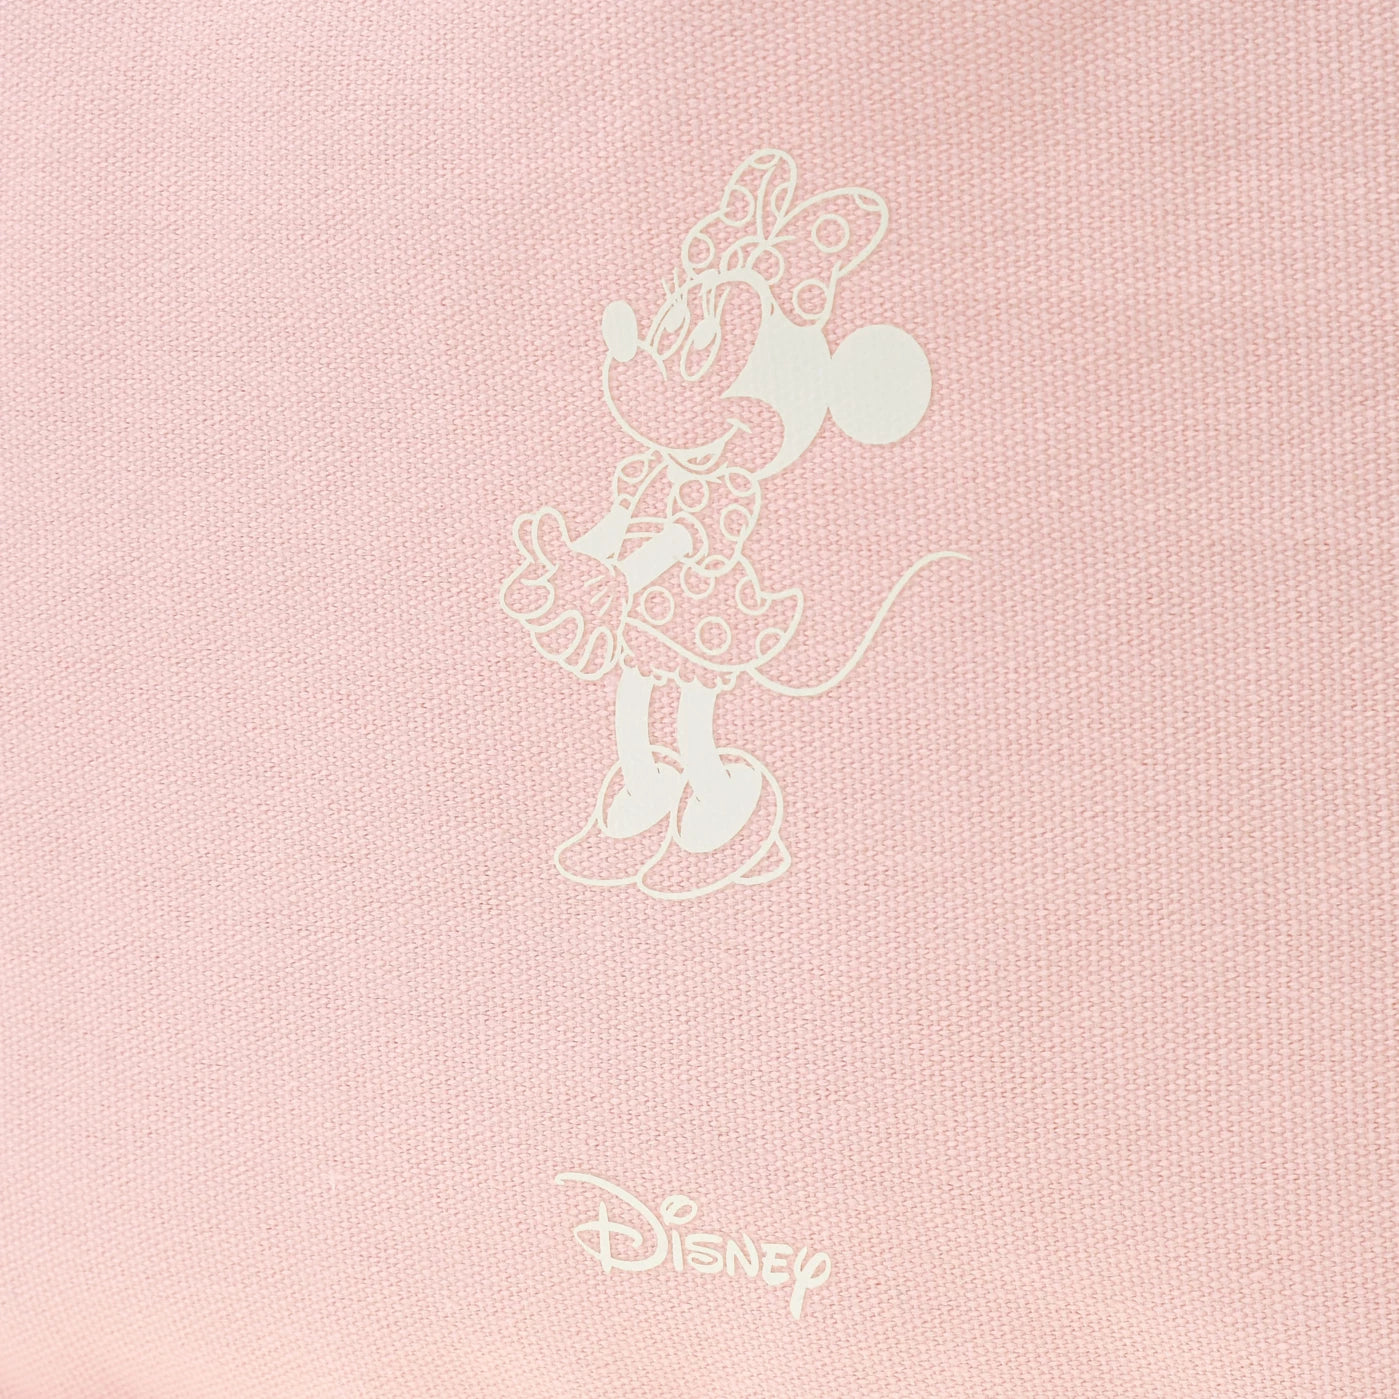 HKDL - Minnie tote bag logo(TOTE BAG Collection)【Ready Stock】